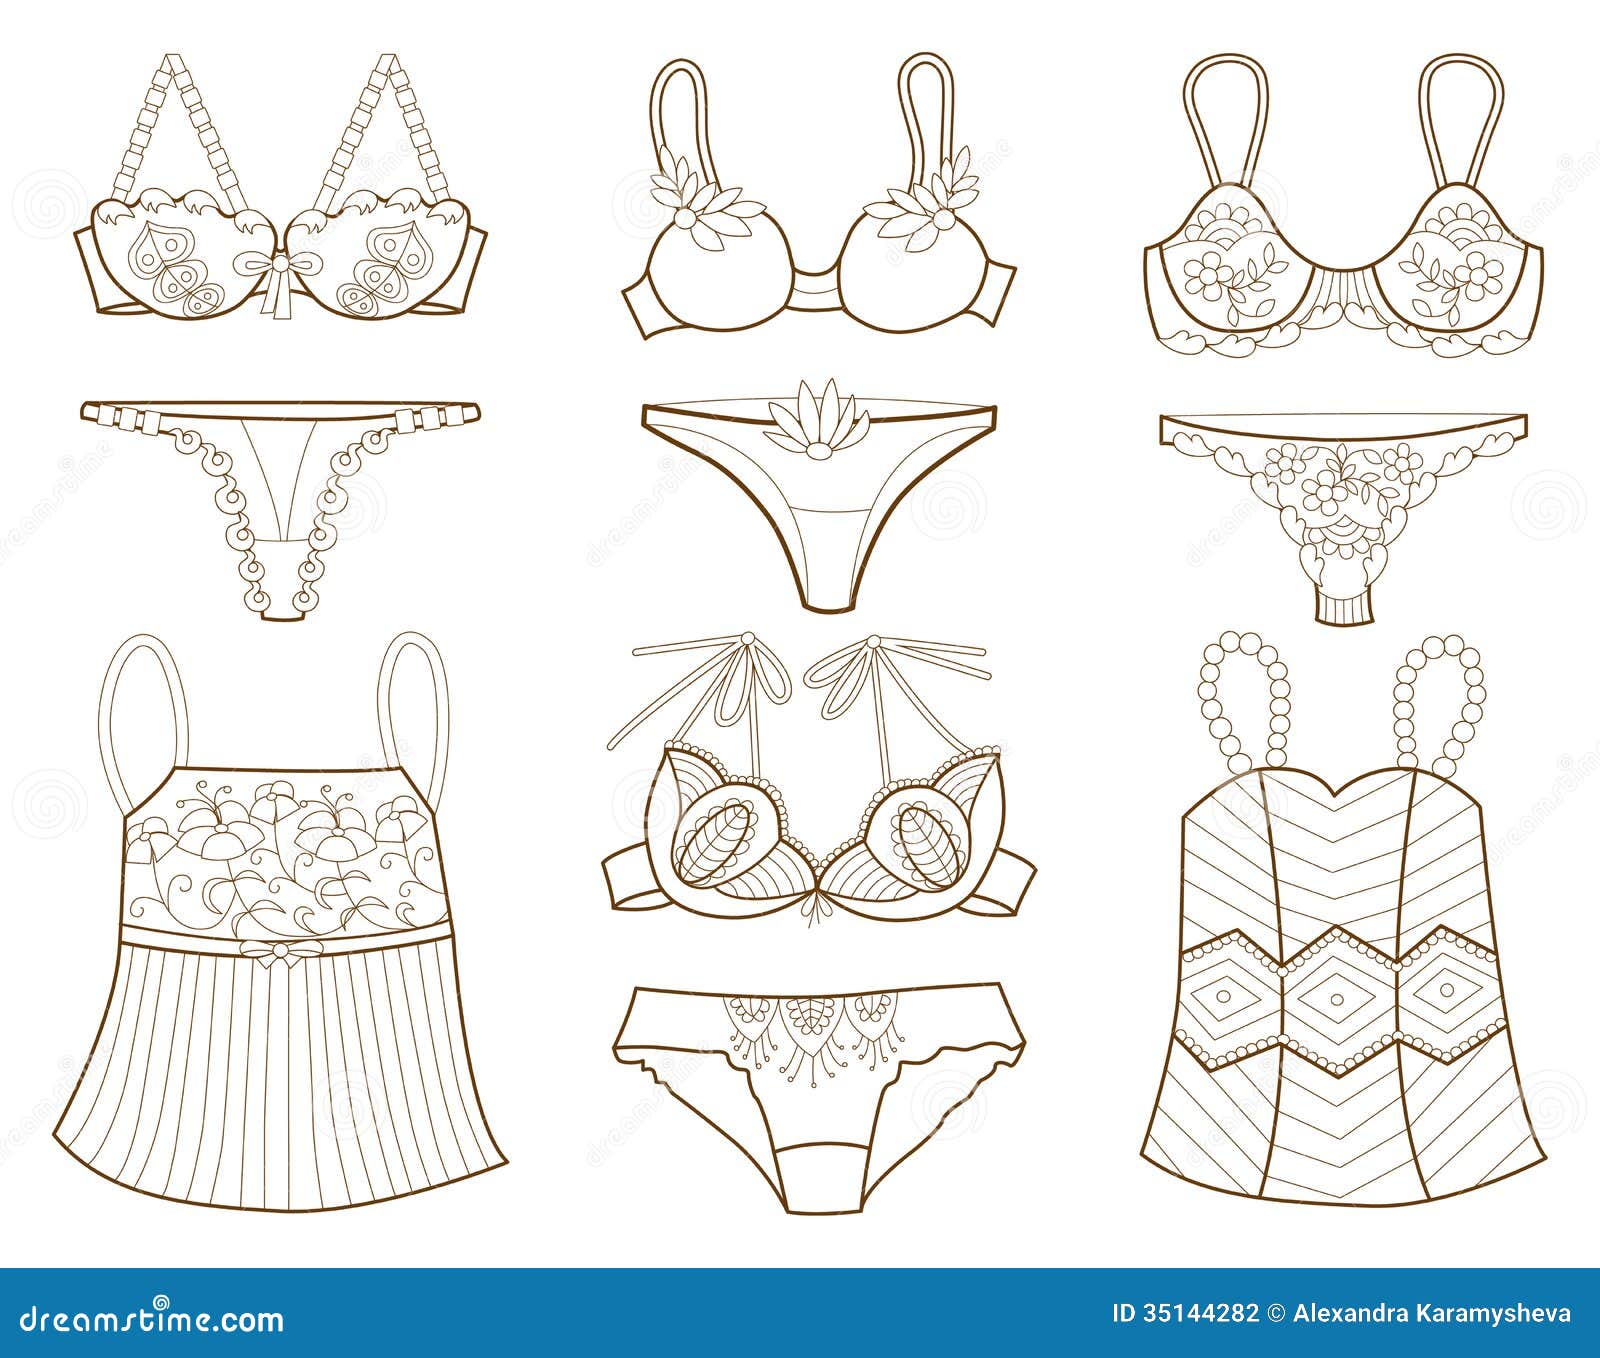 underwear coloring pages - photo #44